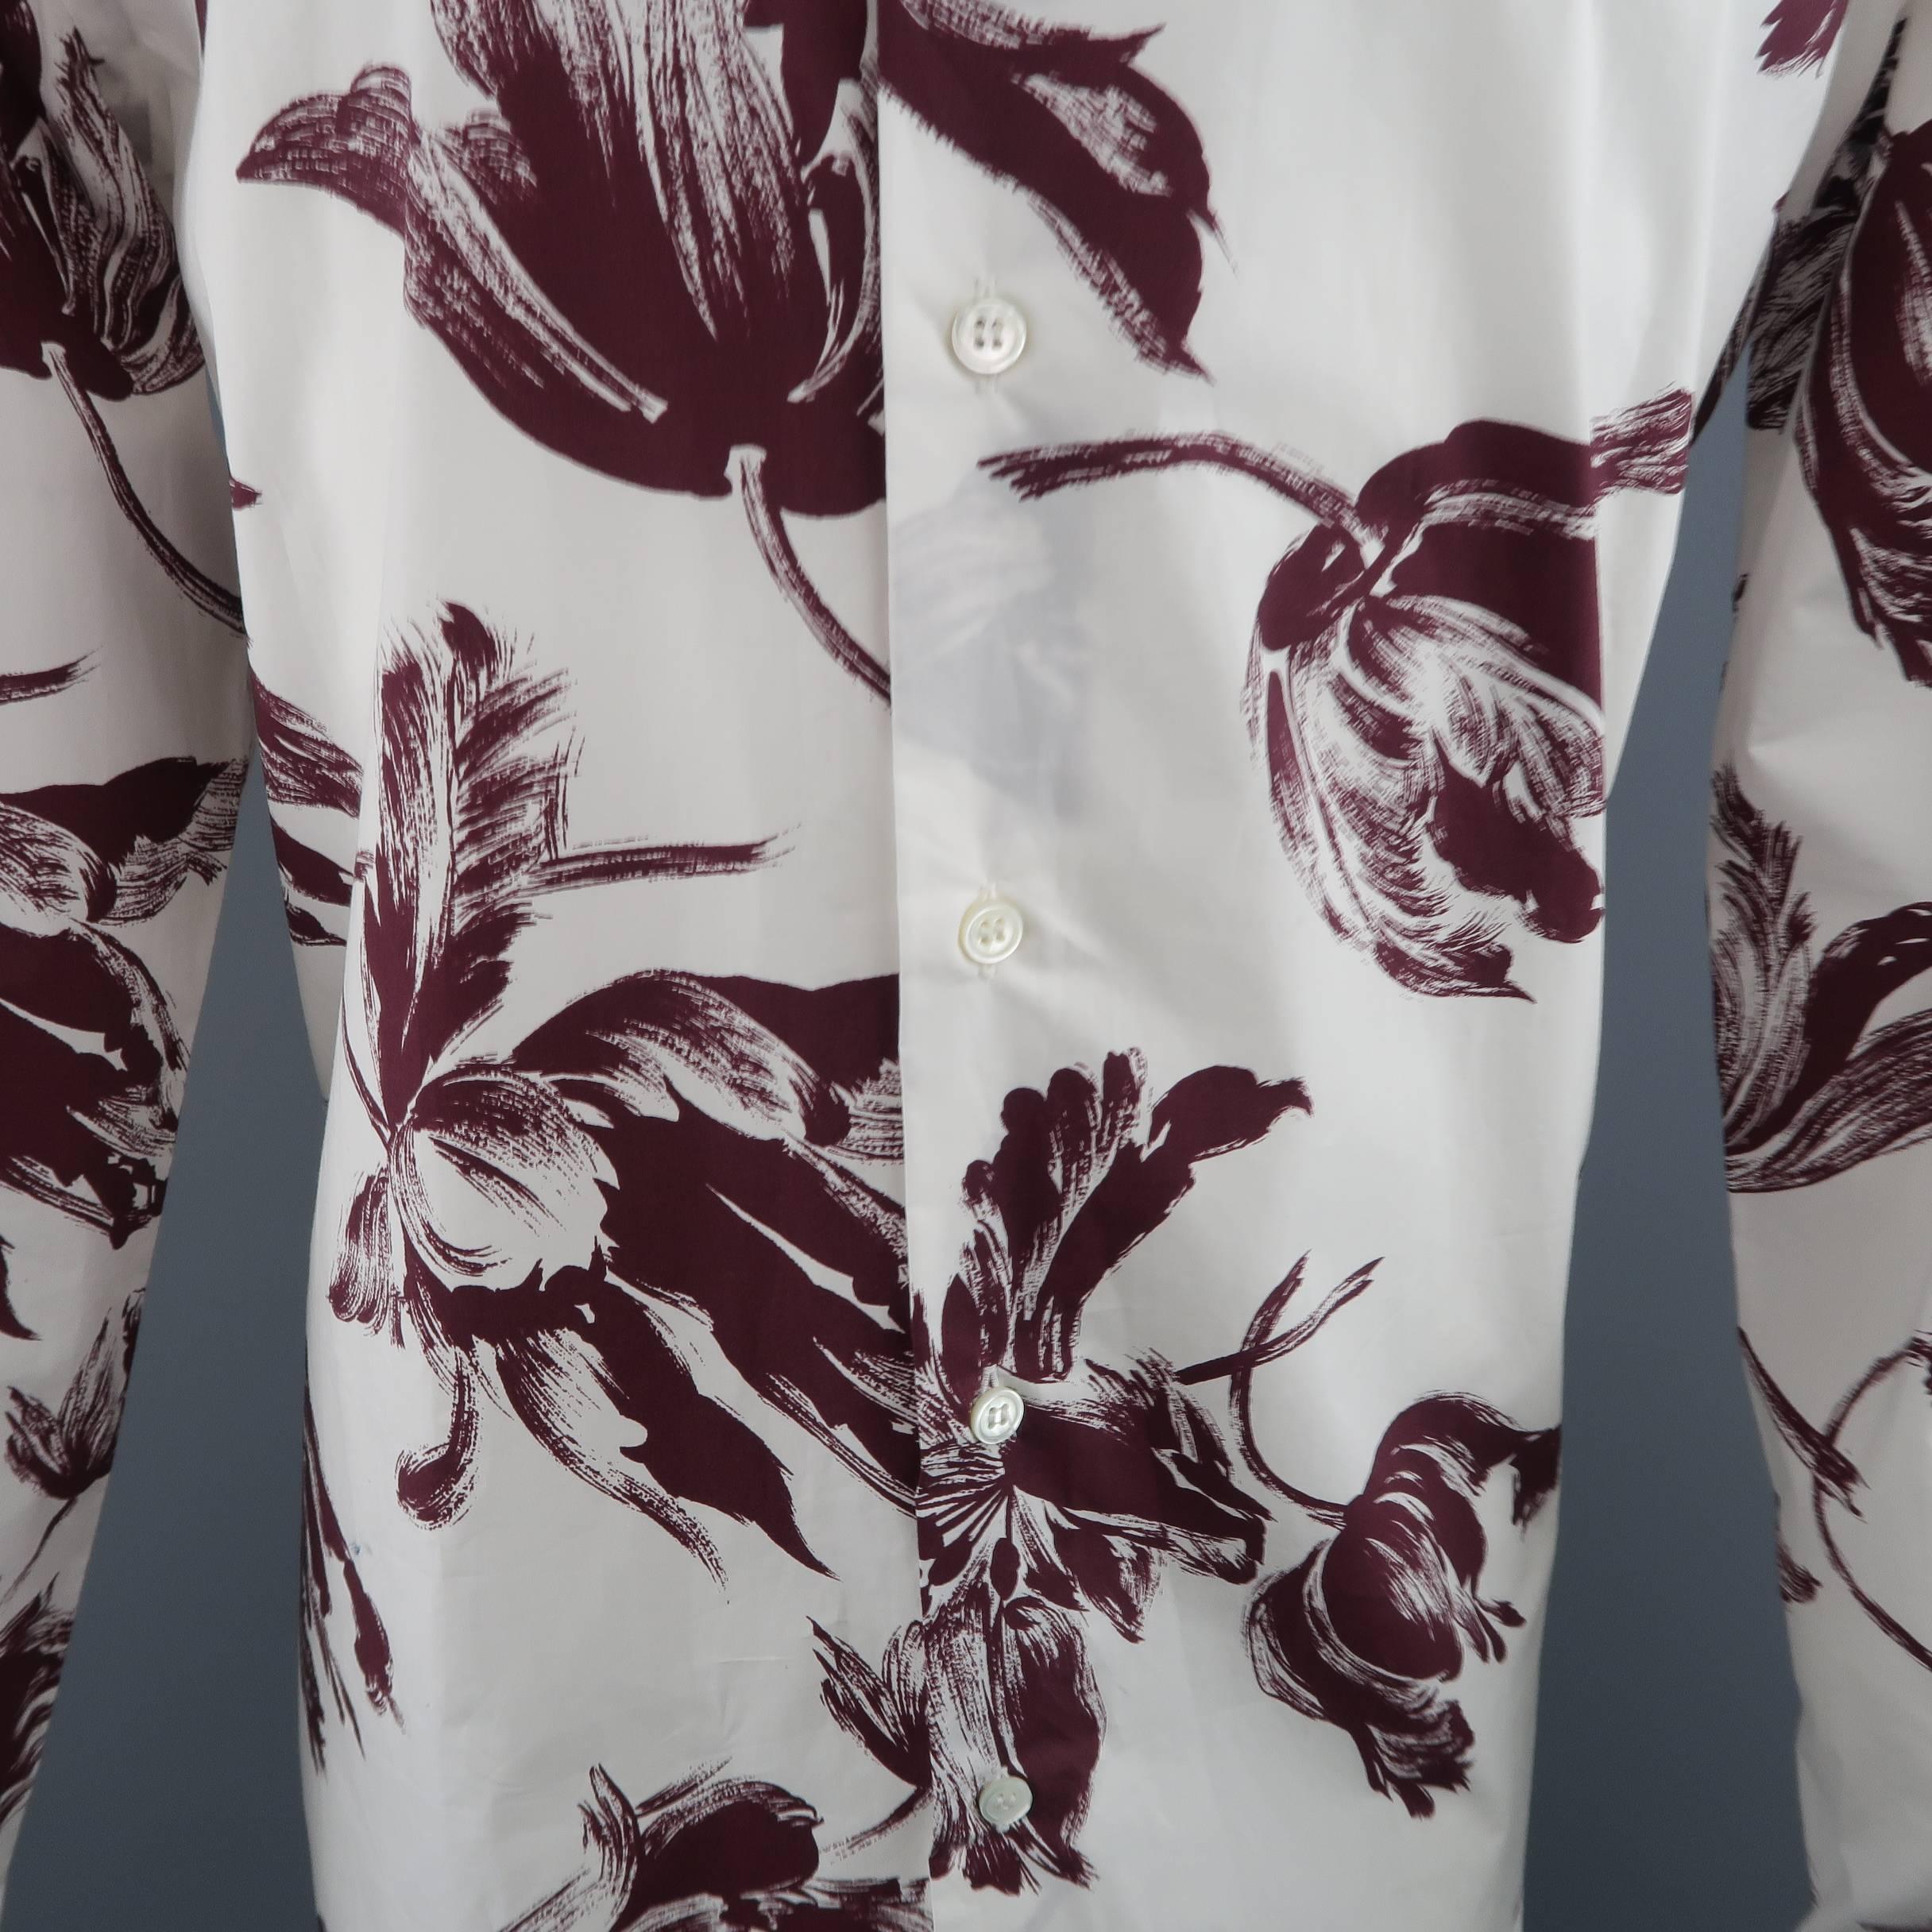 MARNI dress shirt comes in a light weight white cotton with all over brush stroke style burgundy floral print with classic fir and pointed collar. Made in Italy.
 
New with Tags.
Marked: IT 52
 
Measurements:
 
Shoulder: 18.5 in.
Chest: 46